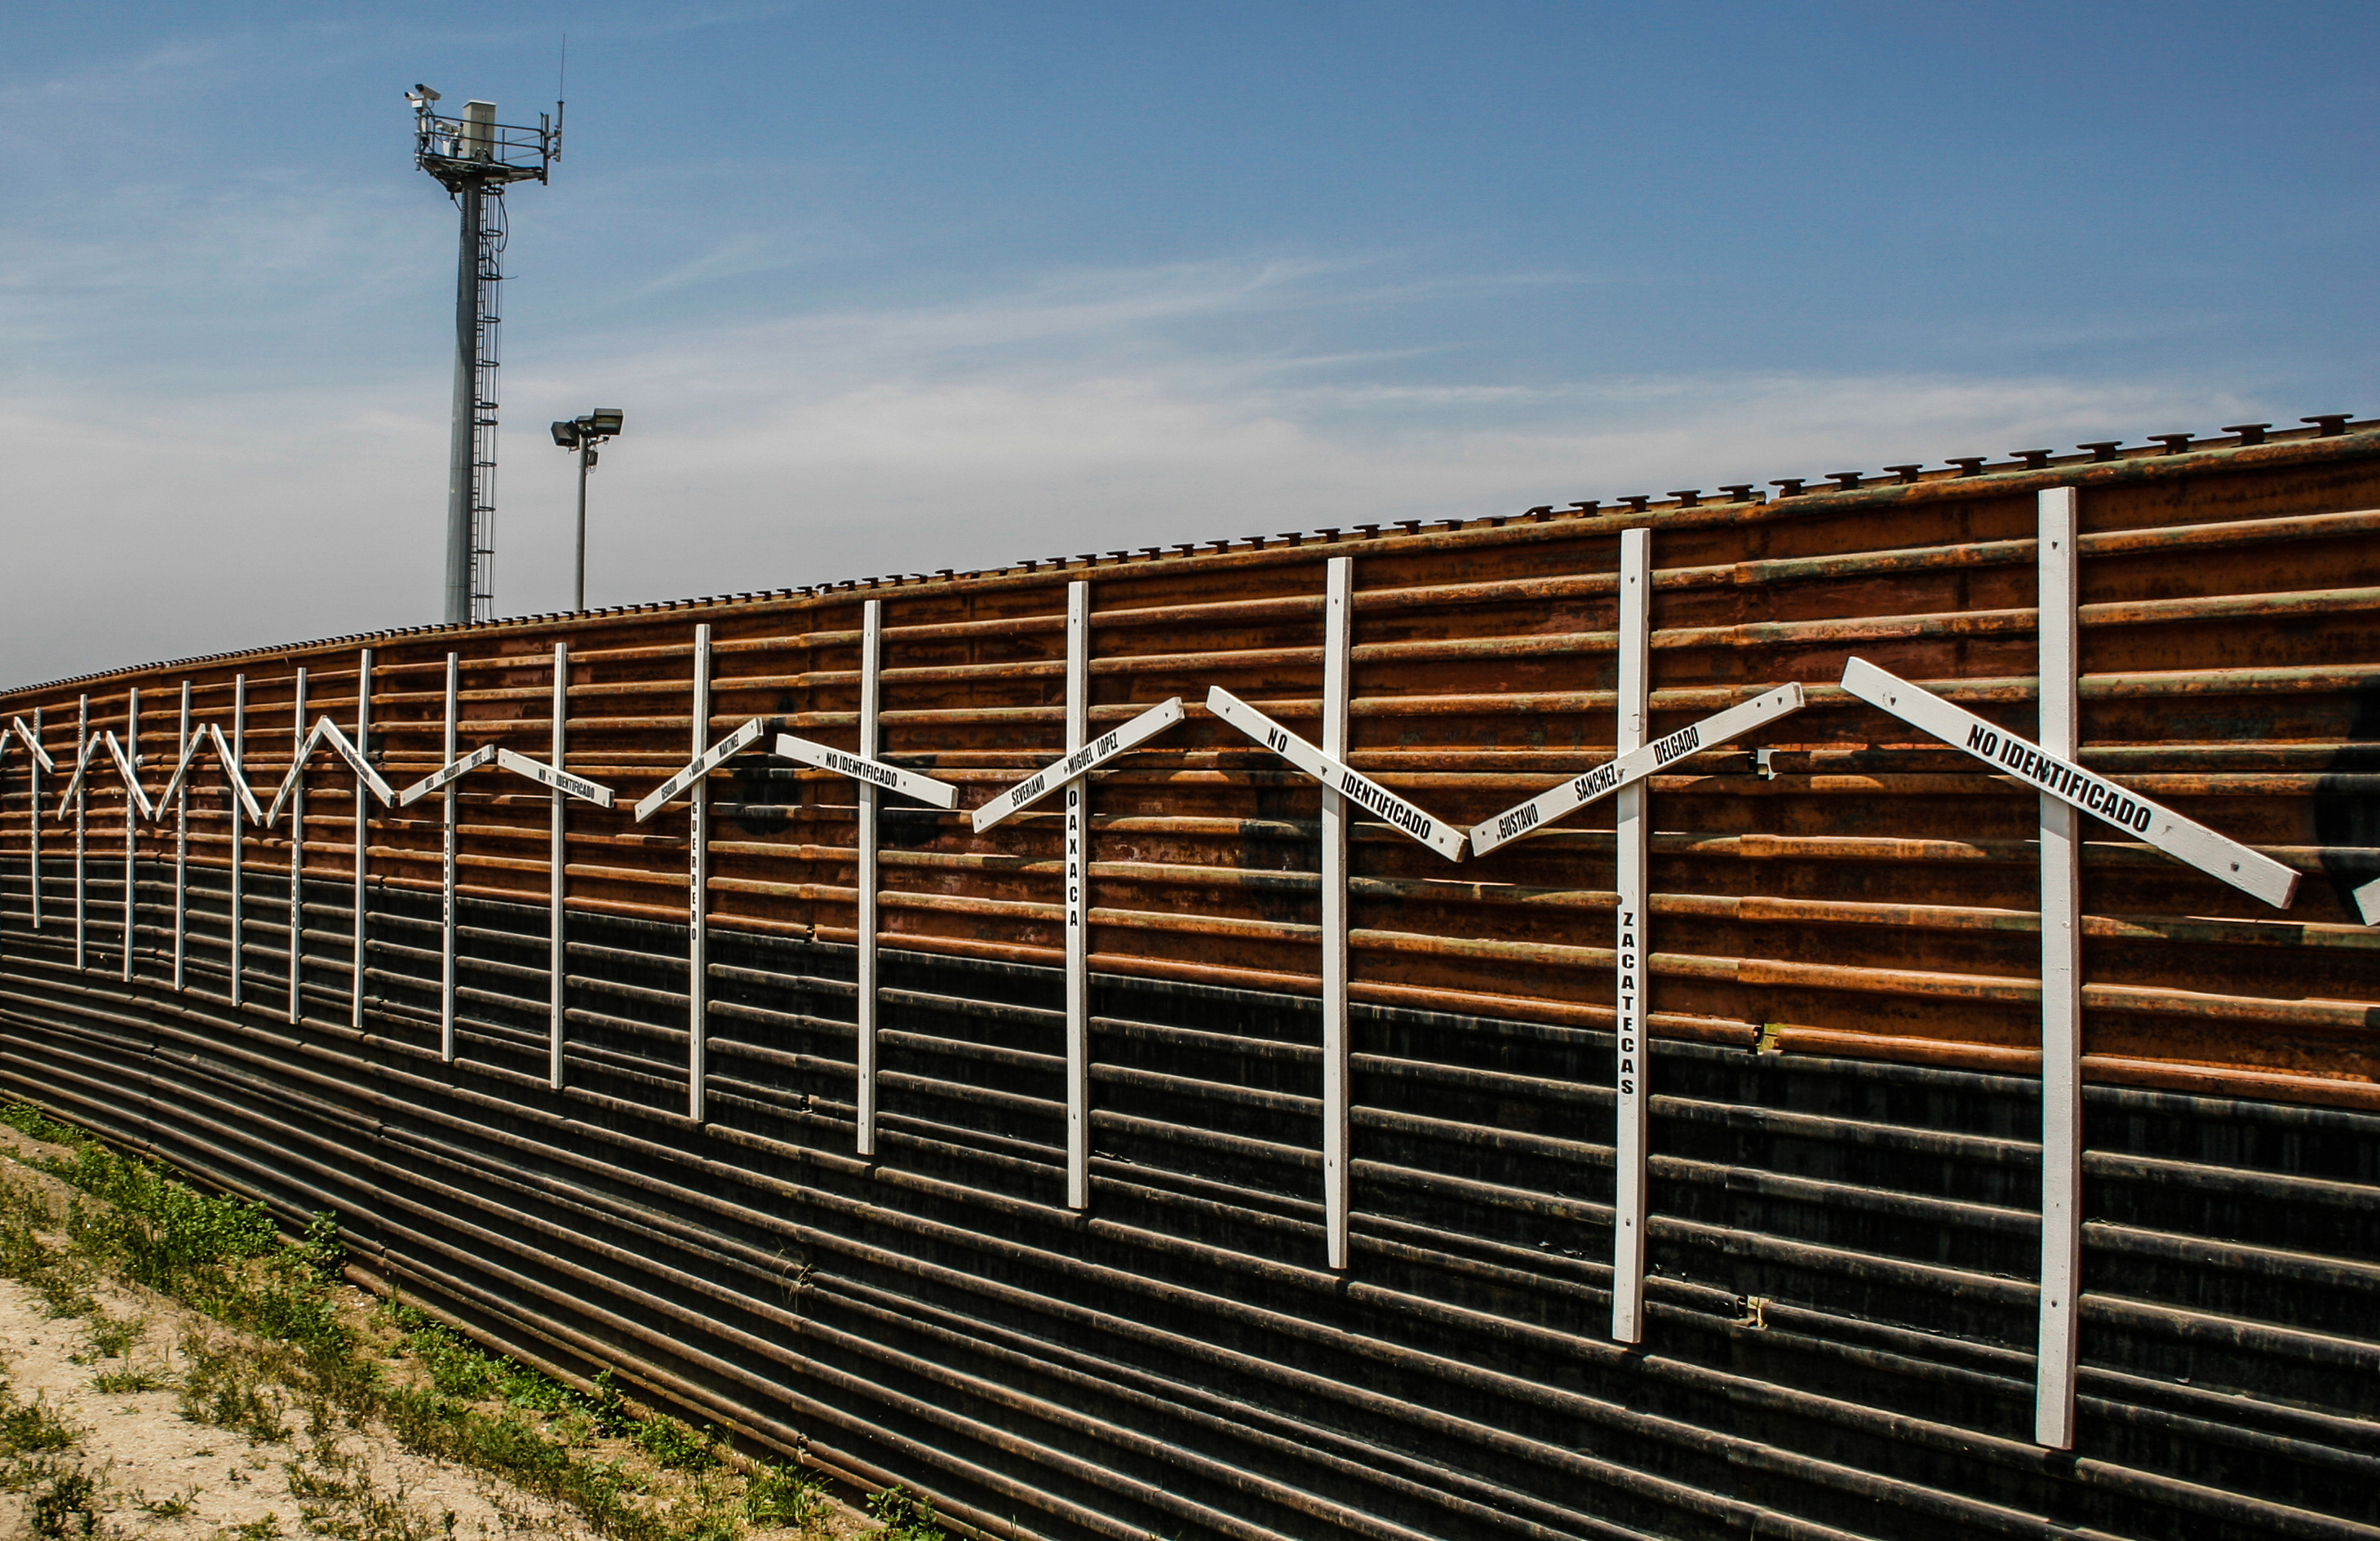 16-state coalition sues Trump over border wall emergency declaration